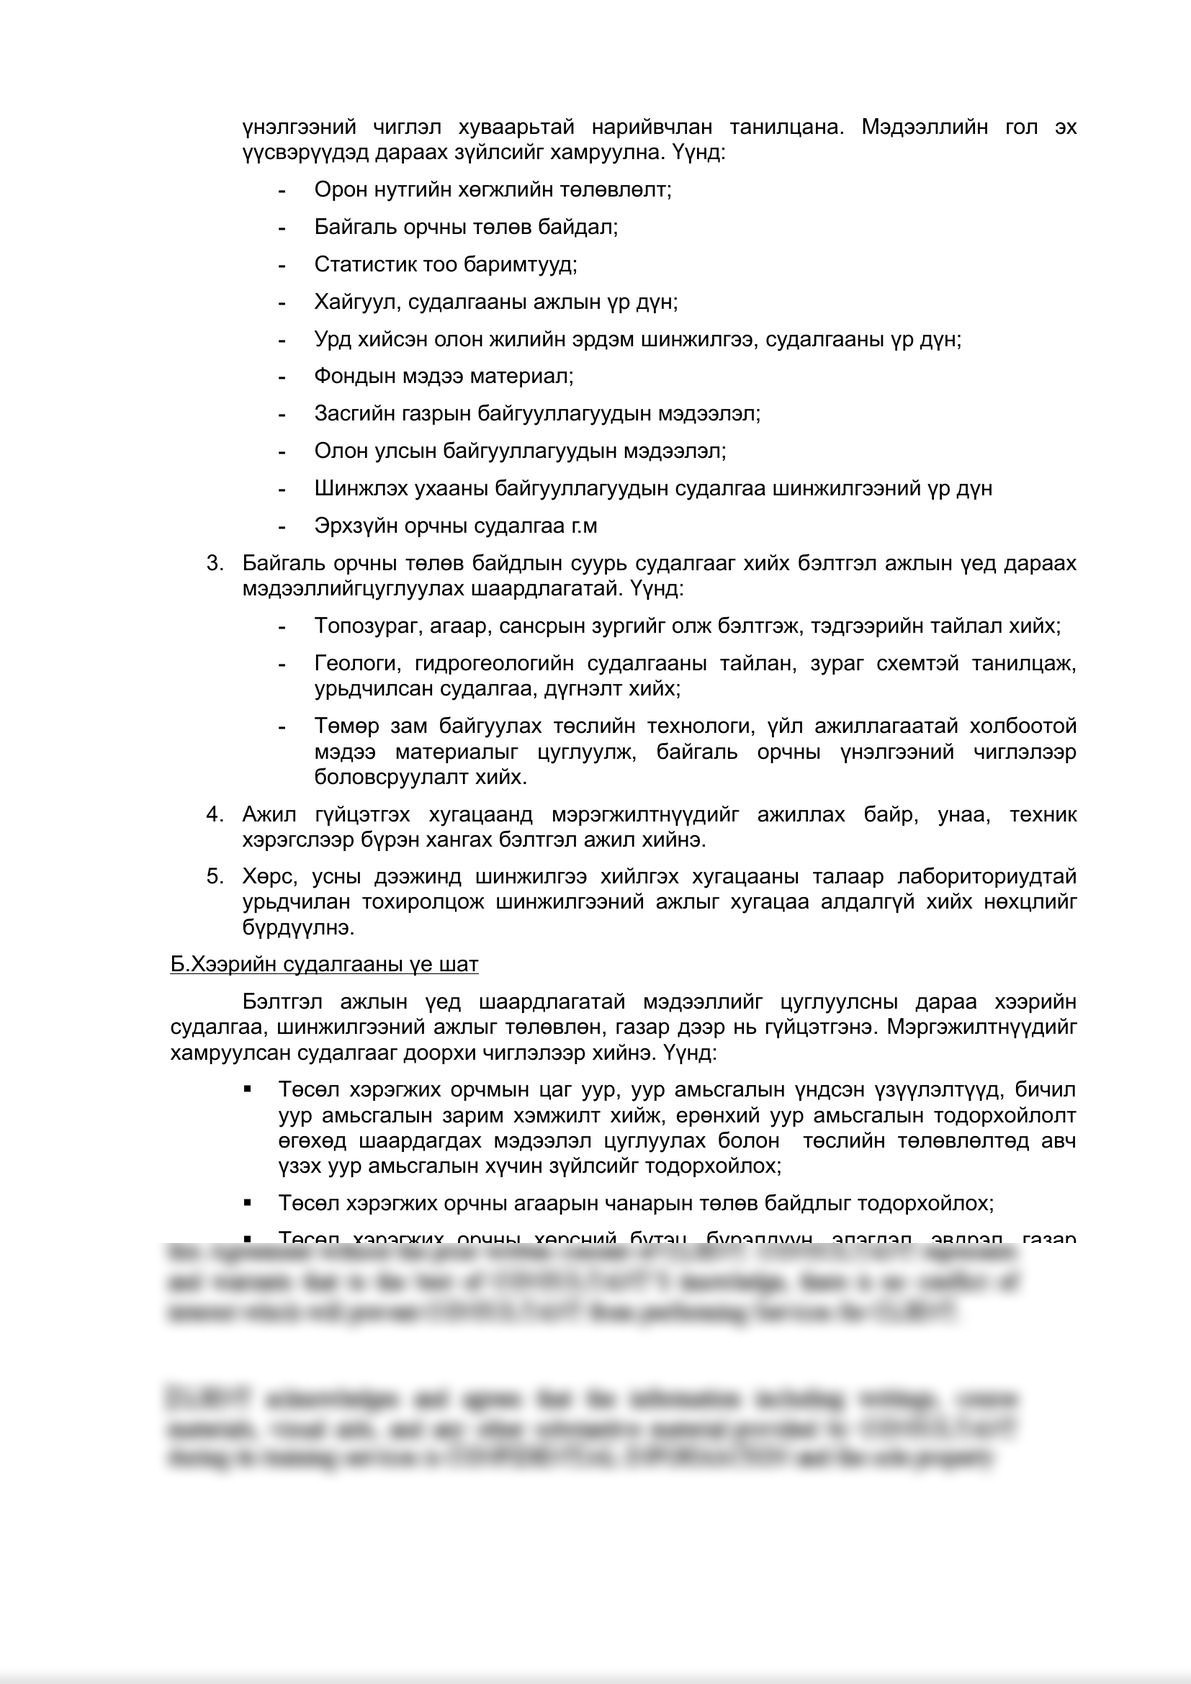 Contract for performing service for detailed environmental impact assessment-3